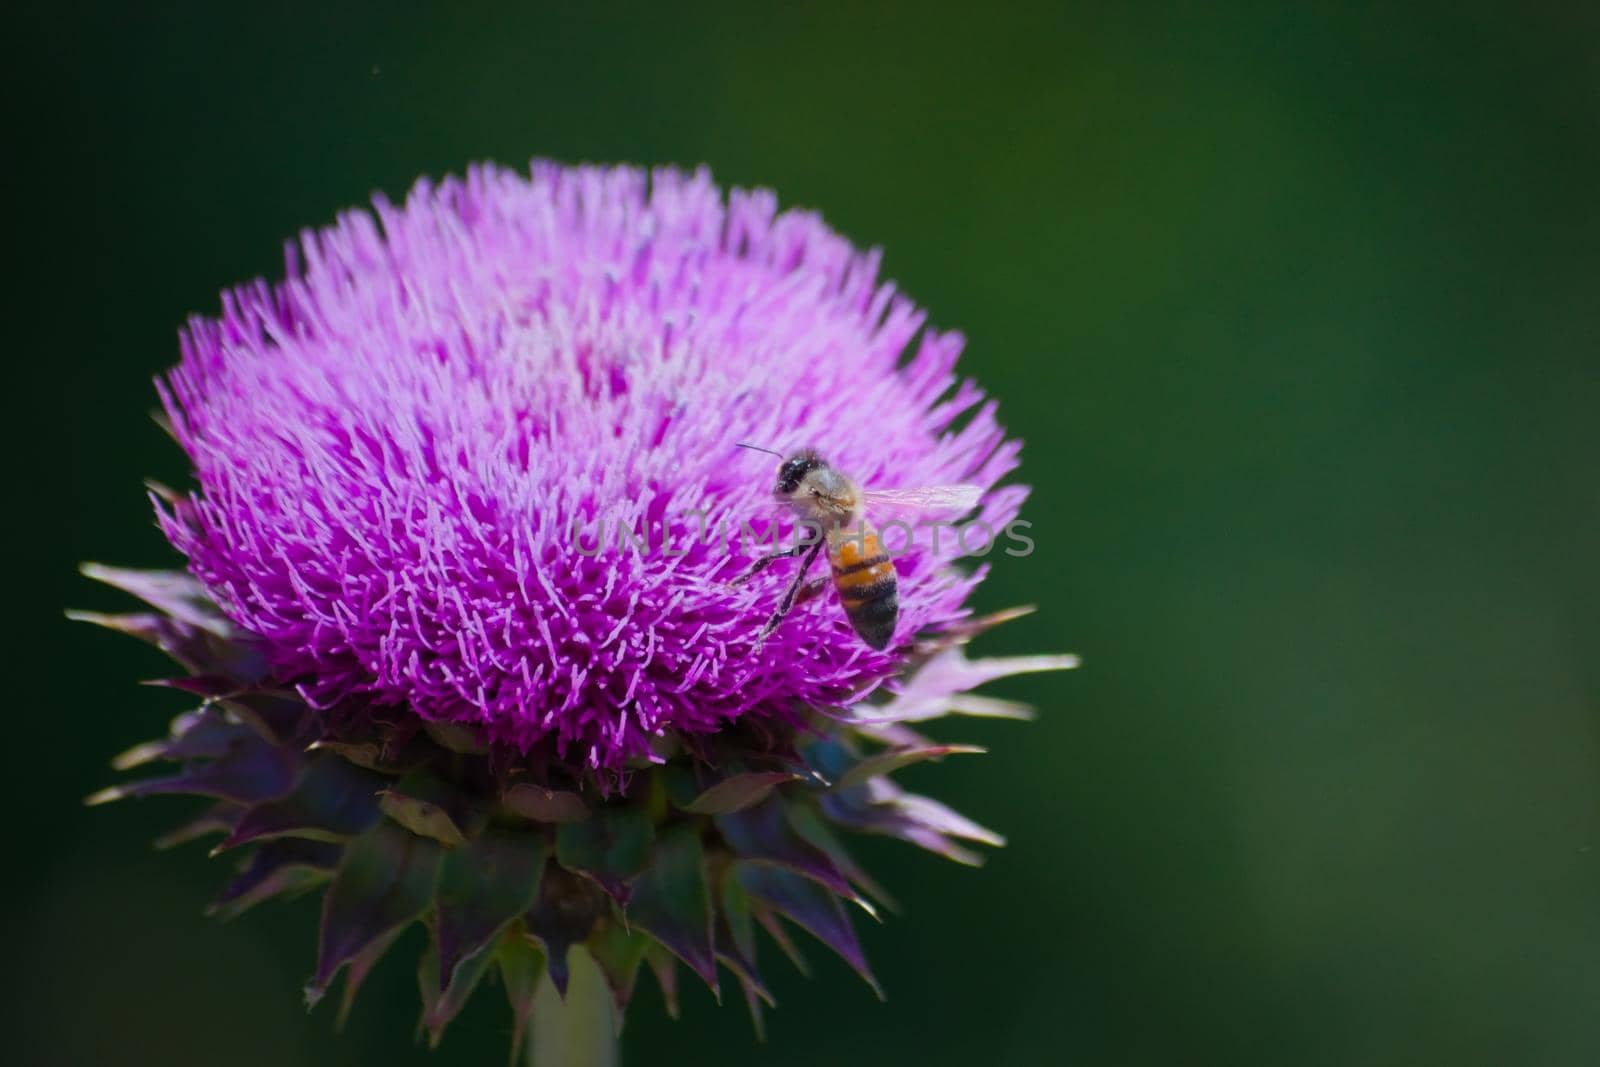 Honey bee collecting nectar and pollen from a blossoming thistle flower in late spring. Macro close up. by hernan_hyper